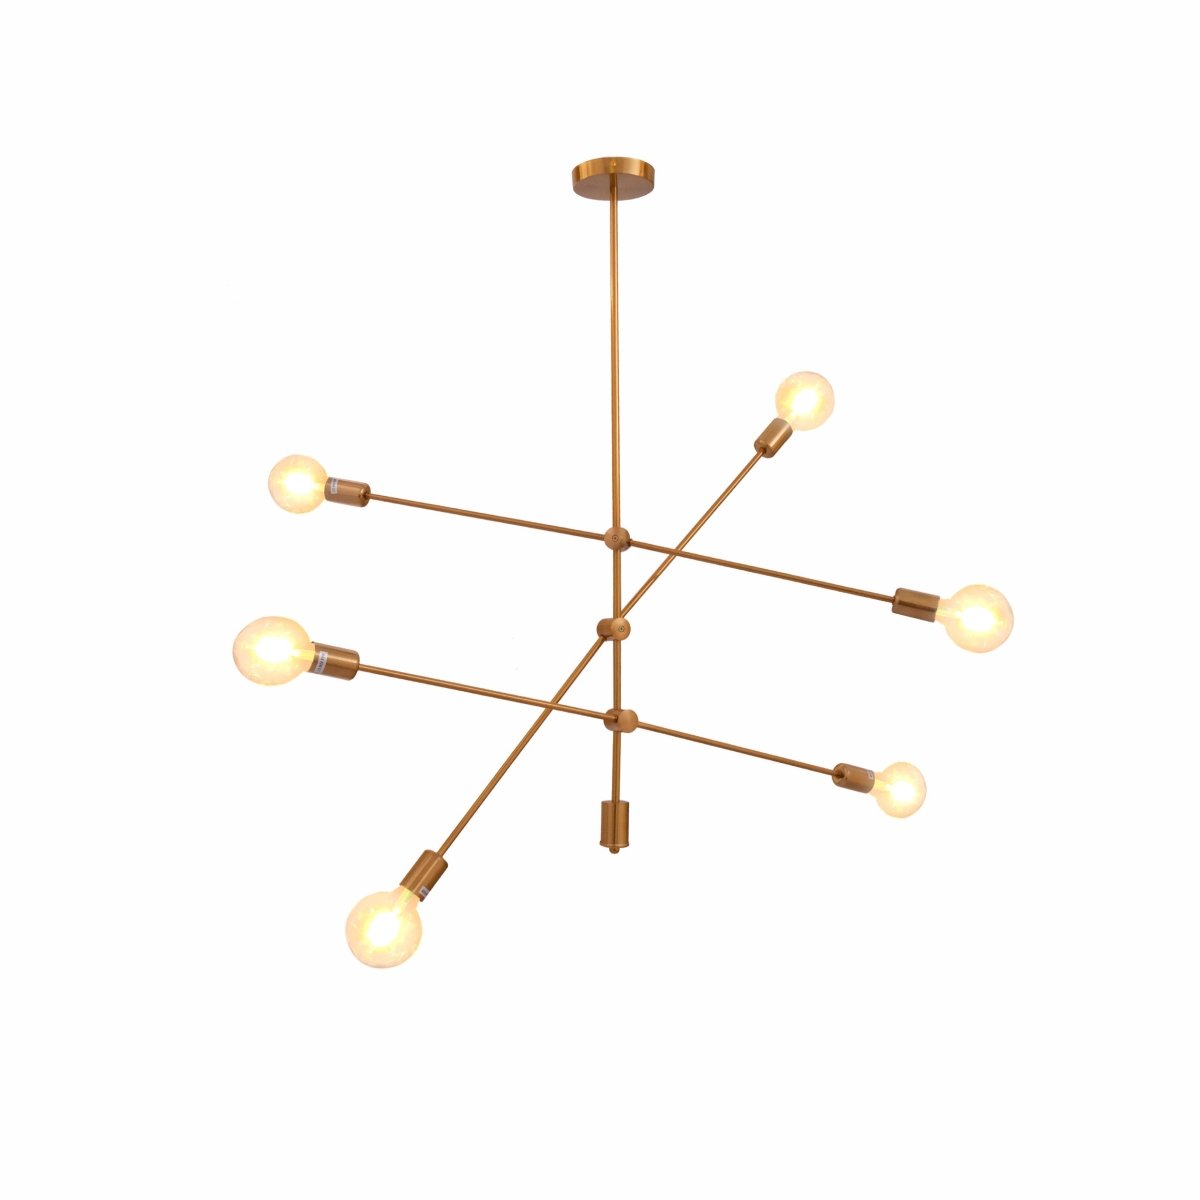 Main image of Gold Rod Modern Pendant Tiered Chandelier Light with 6xE27 Fittings | TEKLED 159-17574